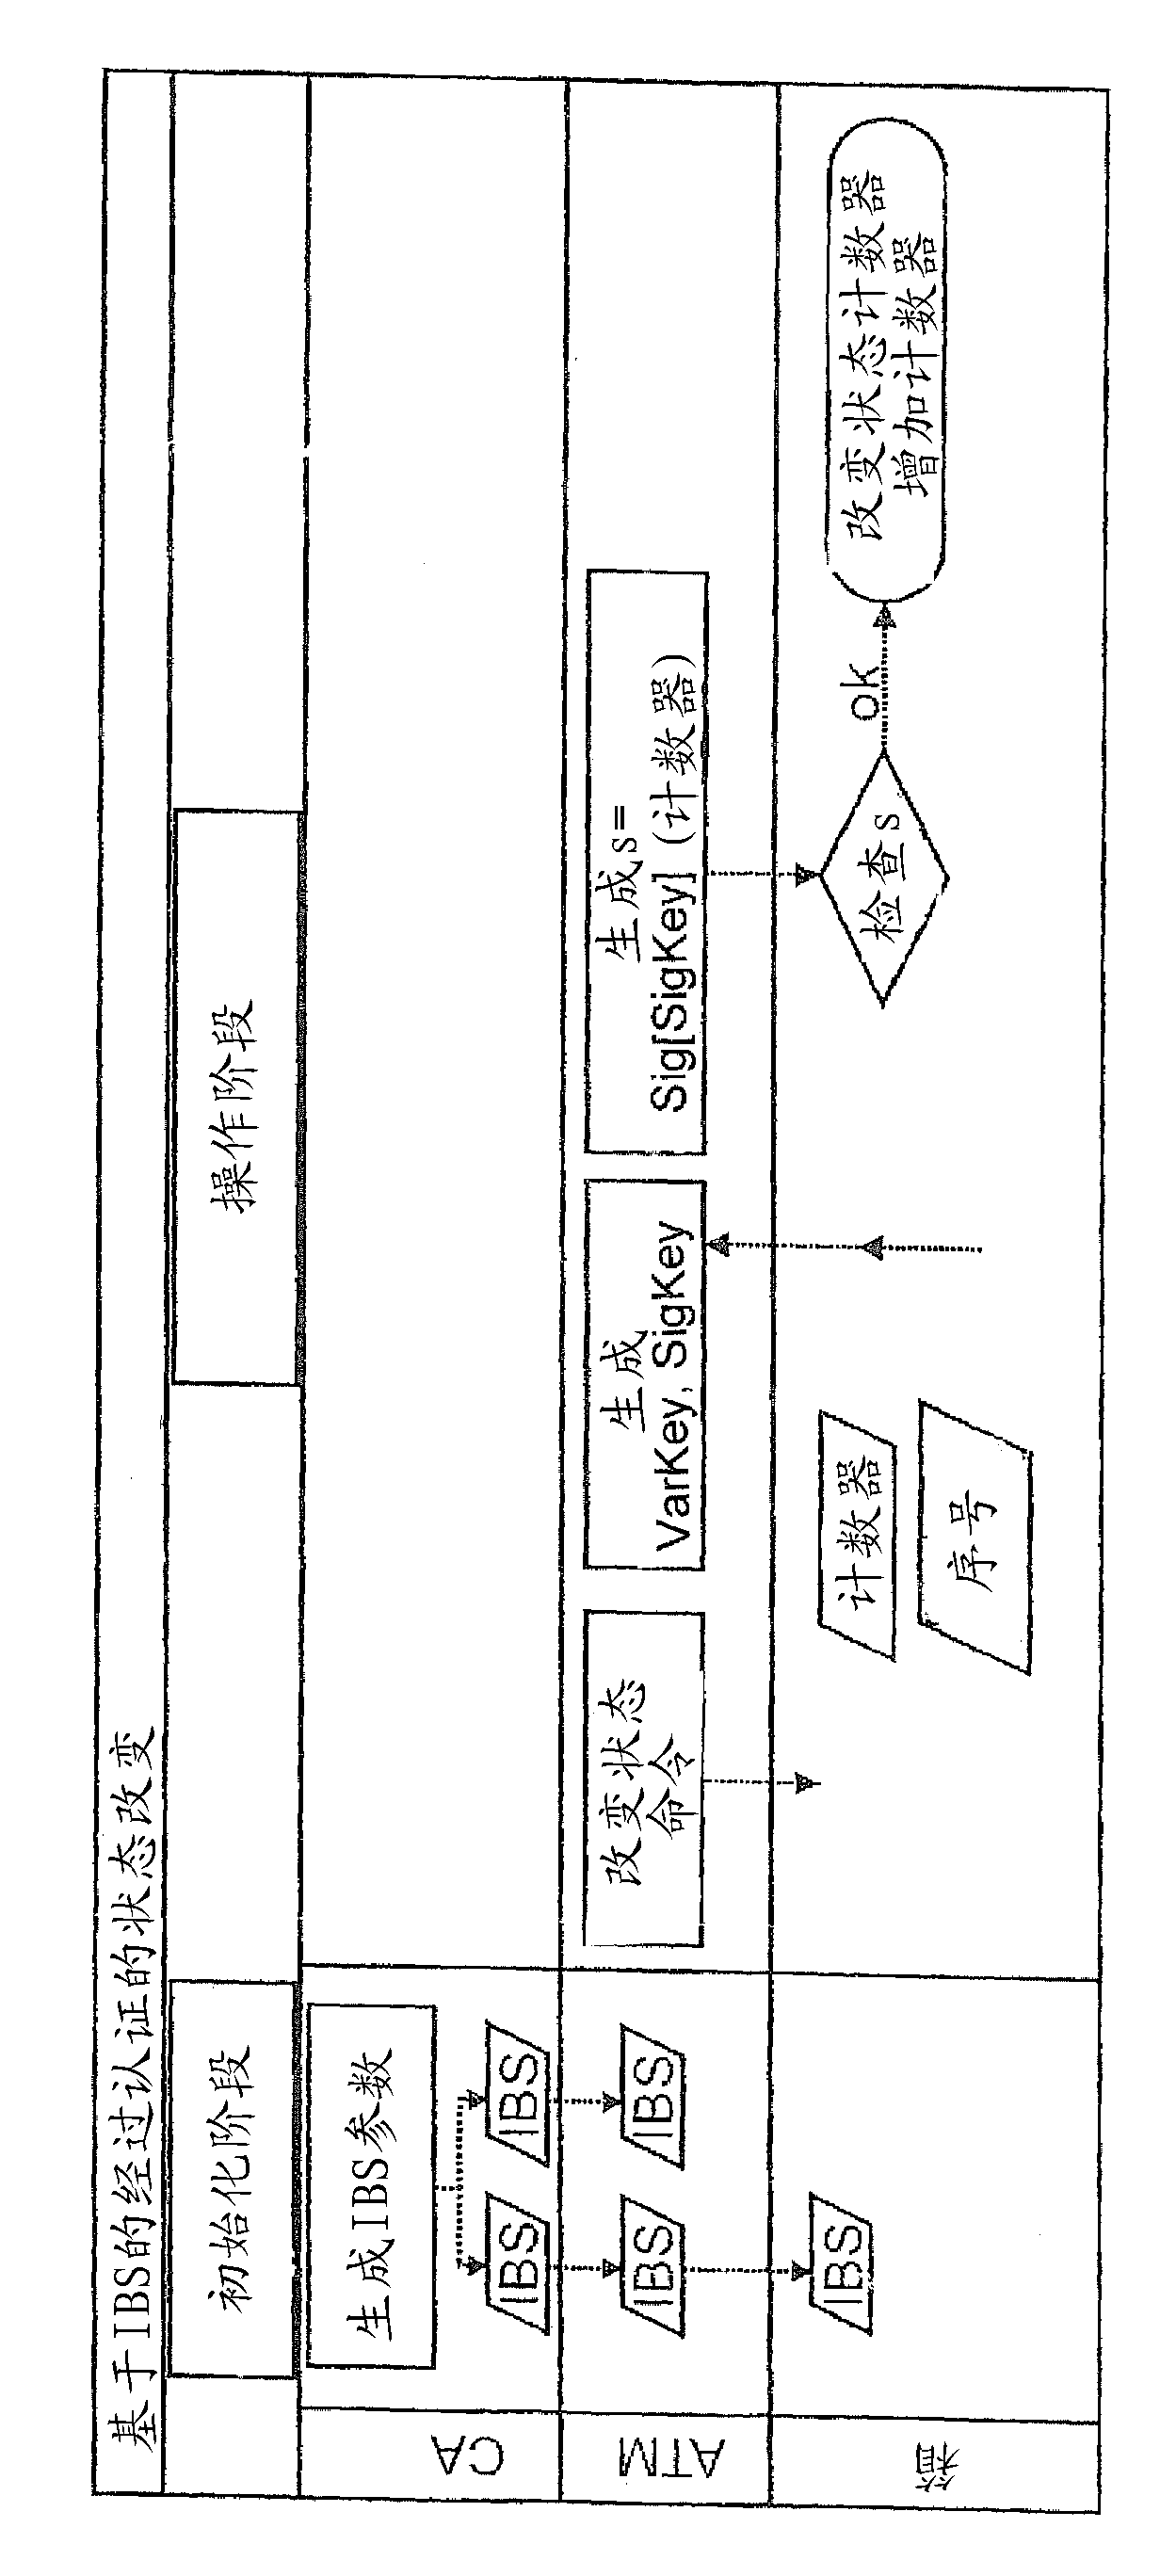 Method and device for authenticating components within an automatic teller machine